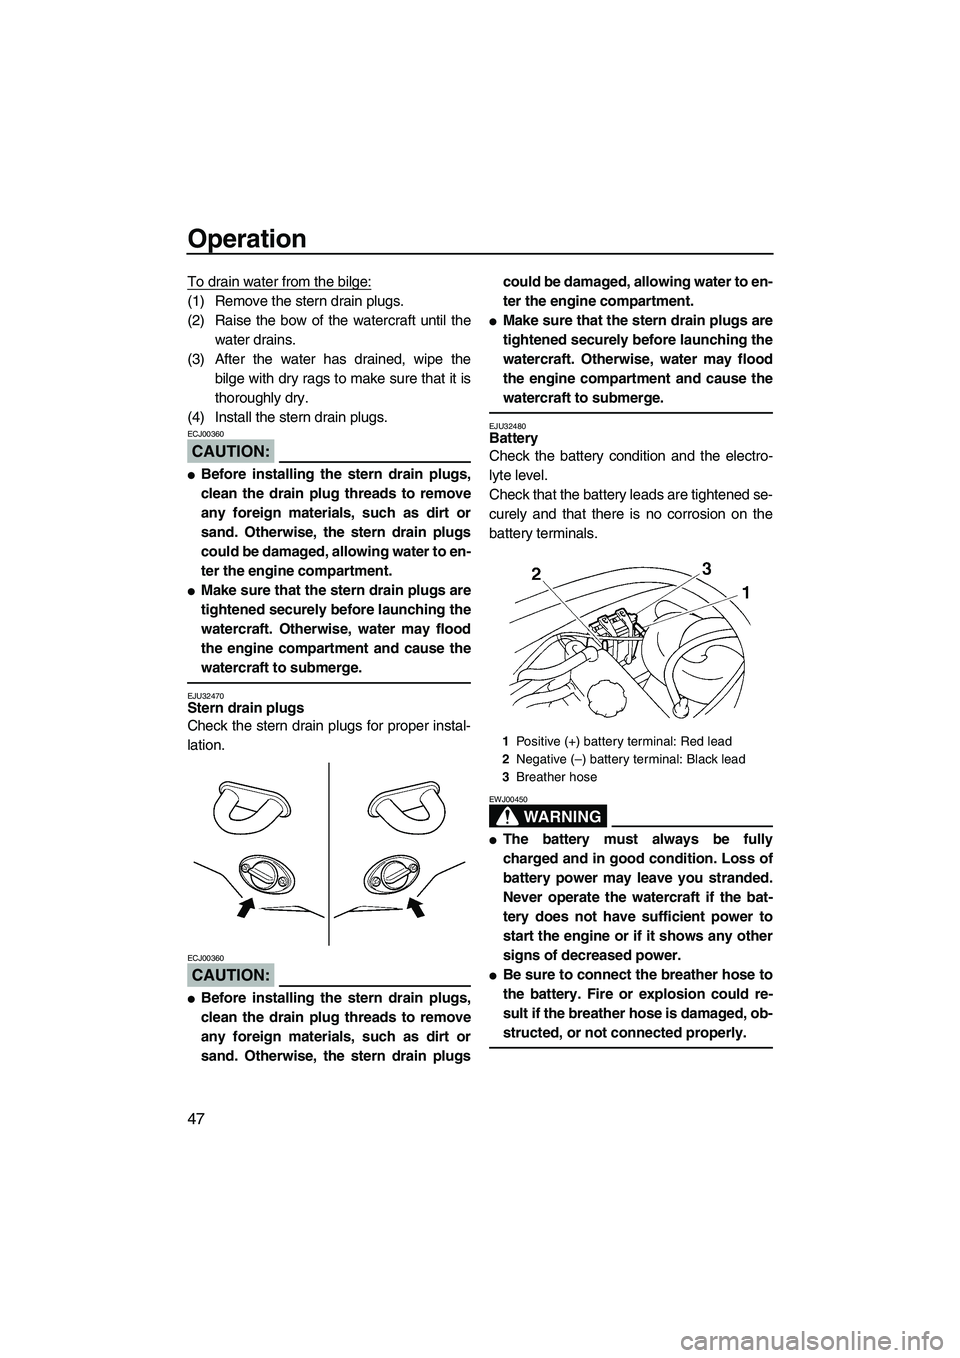 YAMAHA VX CRUISER 2007  Owners Manual Operation
47
To drain water from the bilge:
(1) Remove the stern drain plugs.
(2) Raise the bow of the watercraft until the
water drains.
(3) After the water has drained, wipe the
bilge with dry rags 